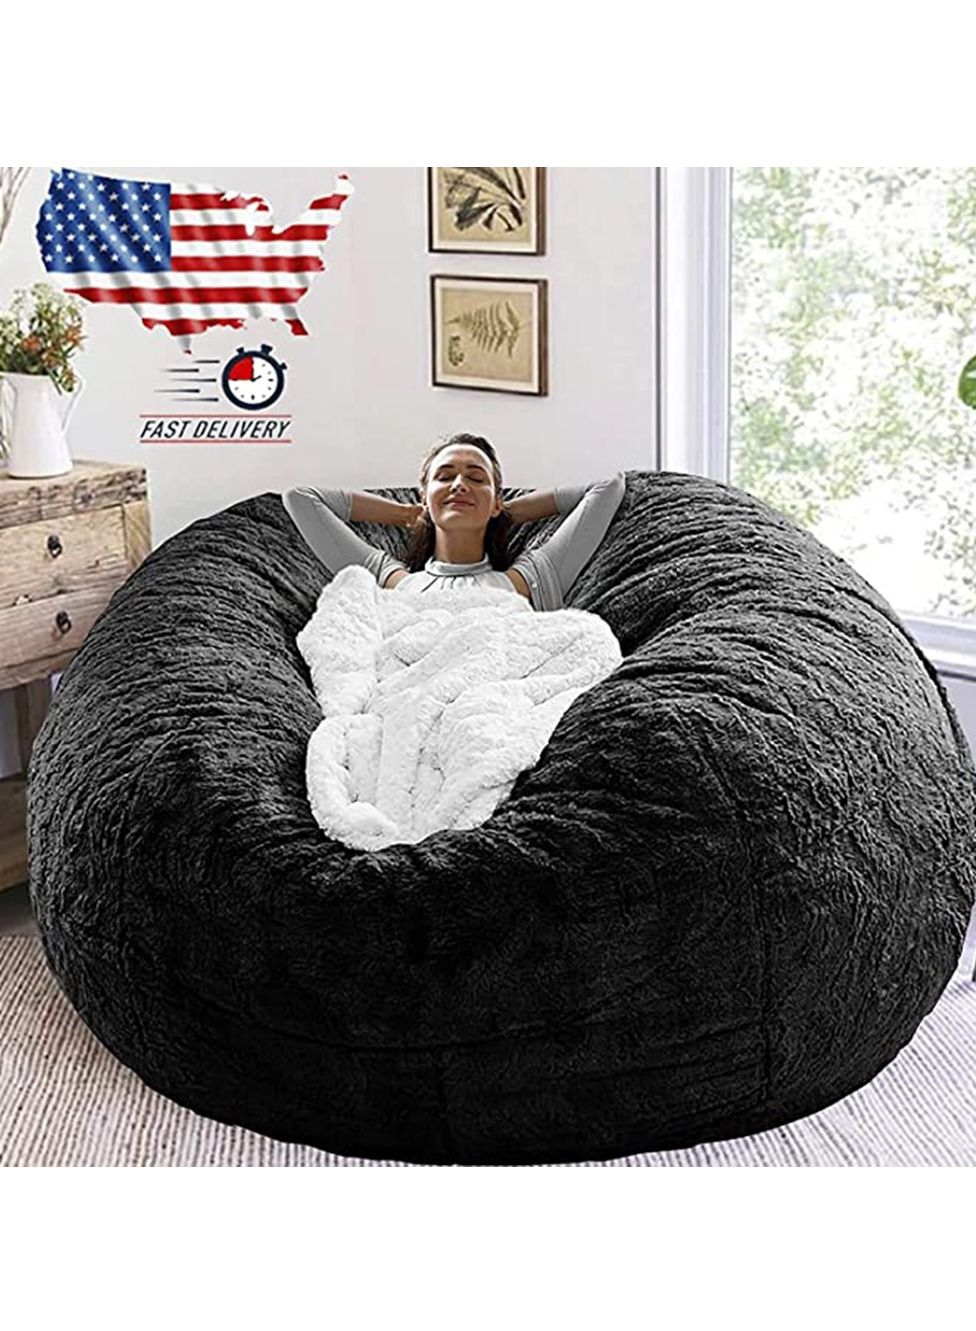 Discover more than 160 personalised bean bags india latest - 3tdesign.edu.vn